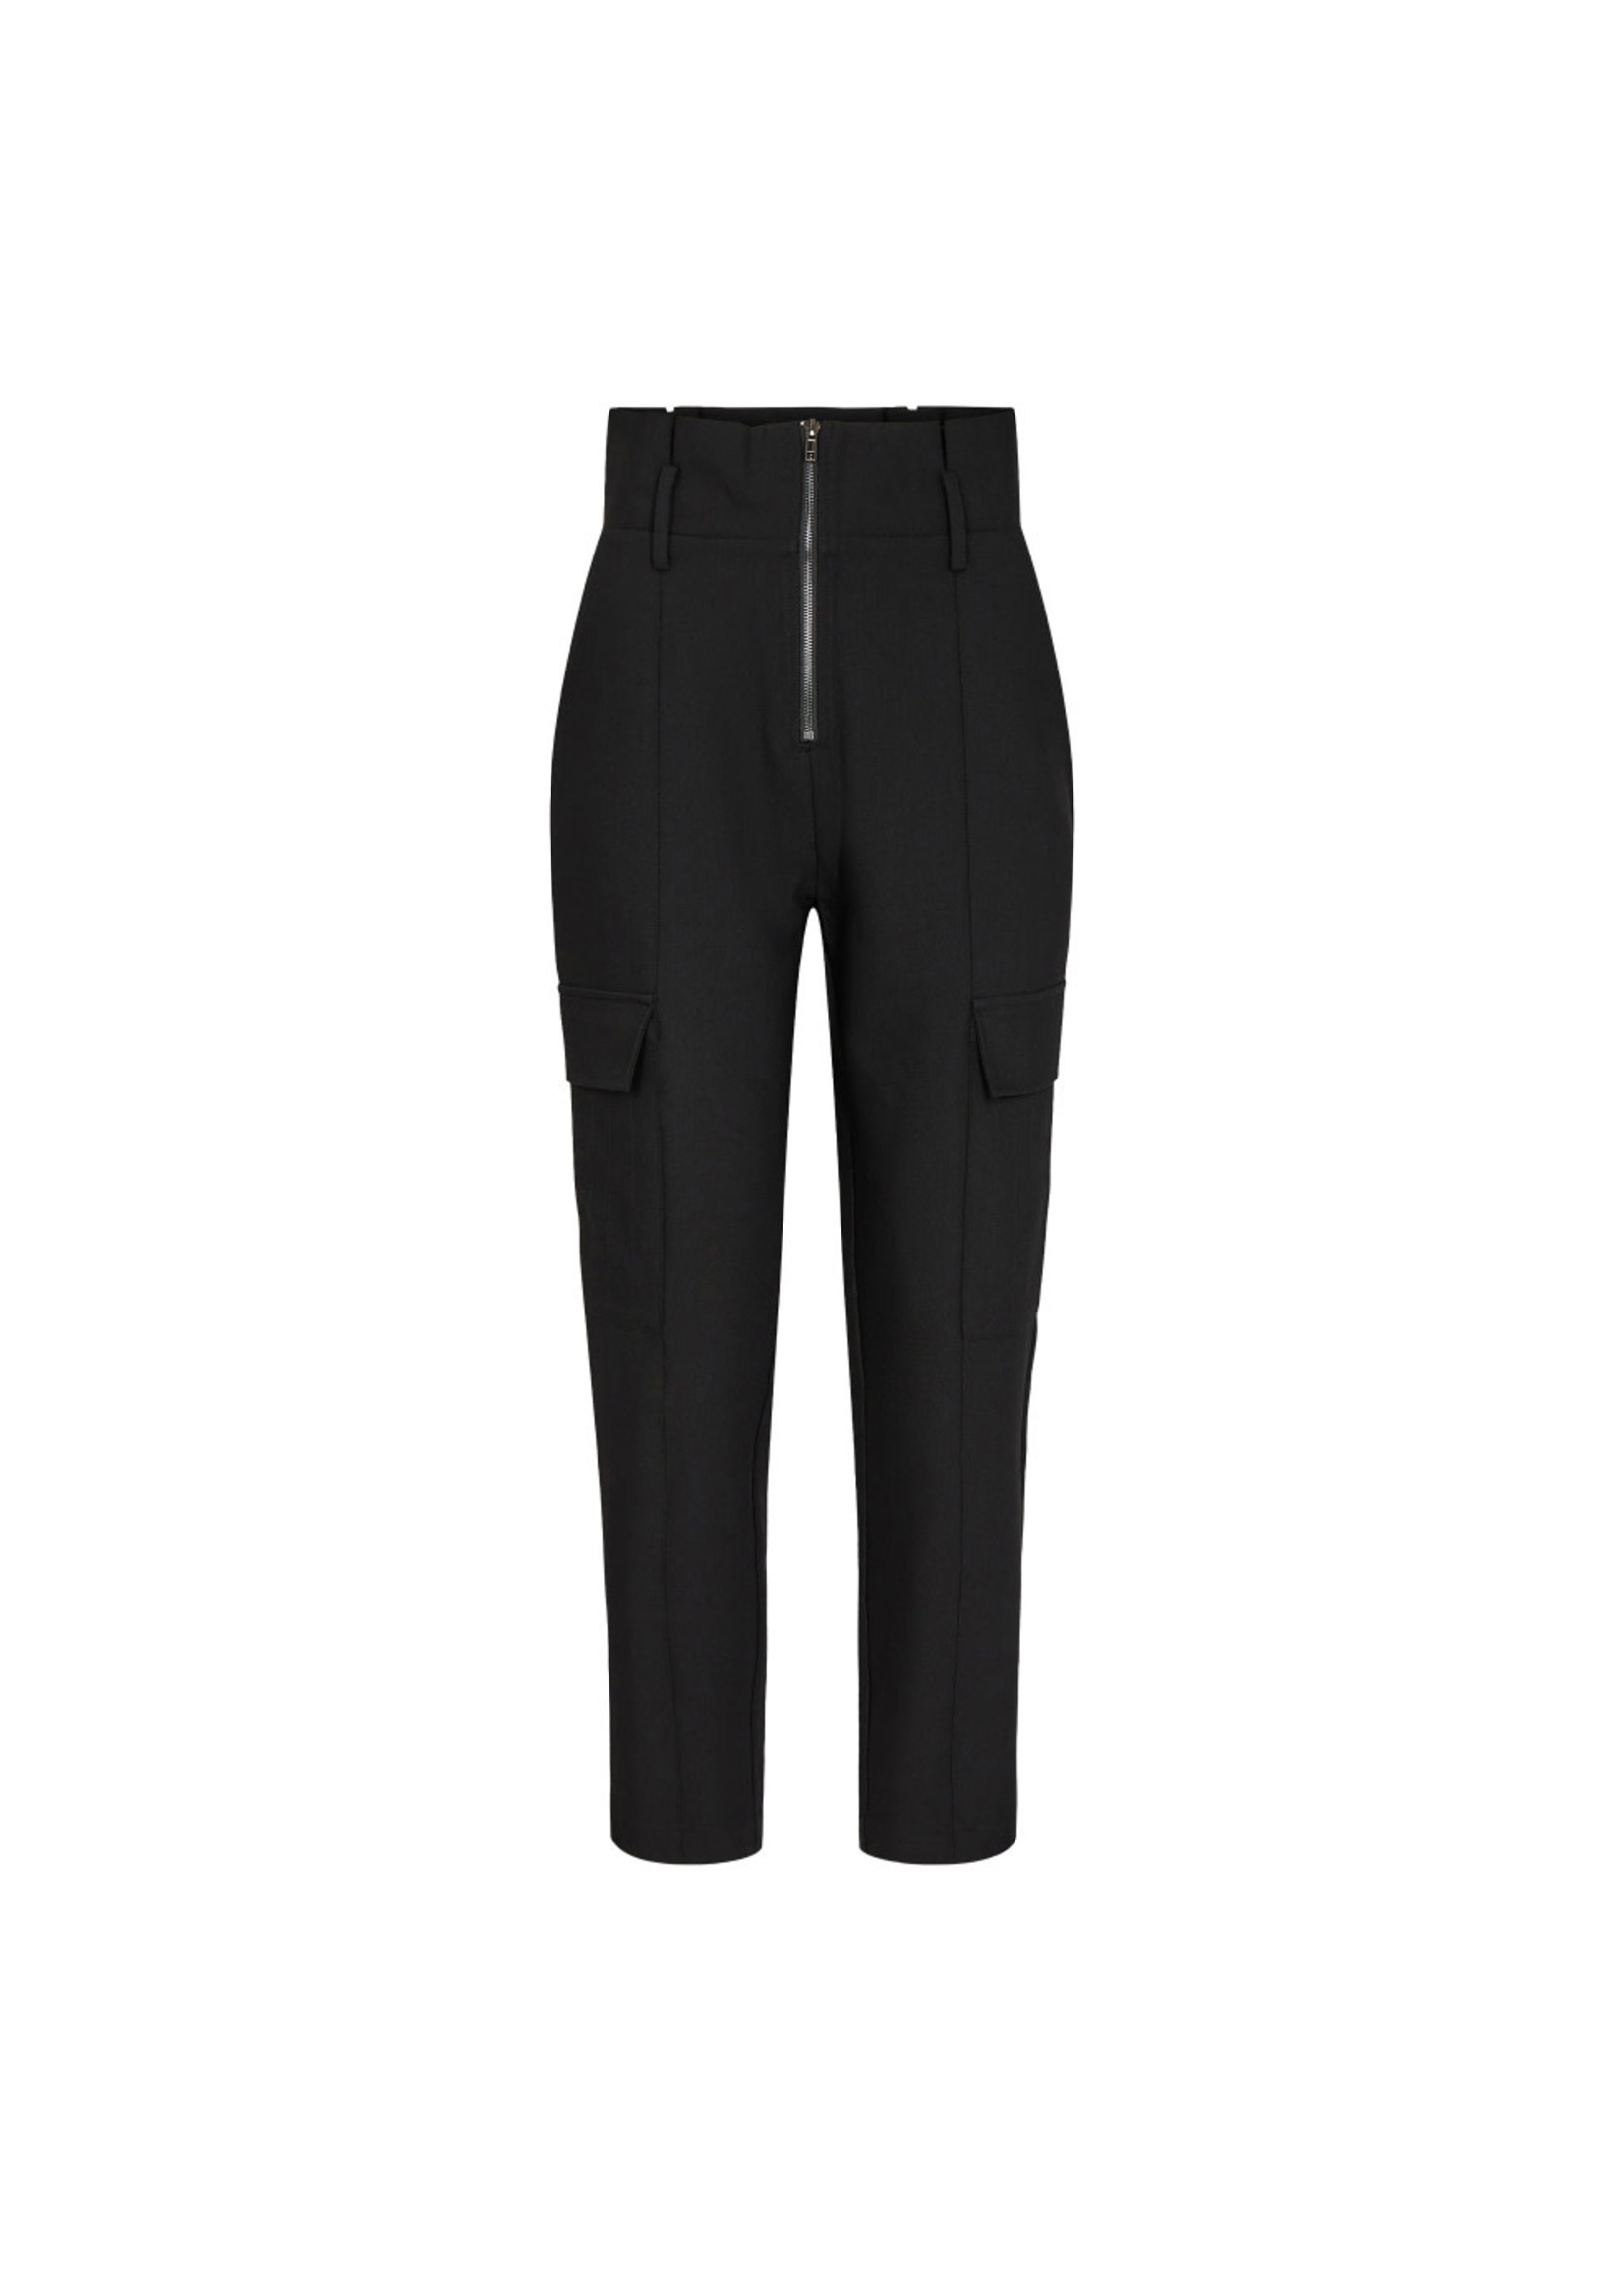 Co Couture Co Couture, Kyle Utility Pant, Black